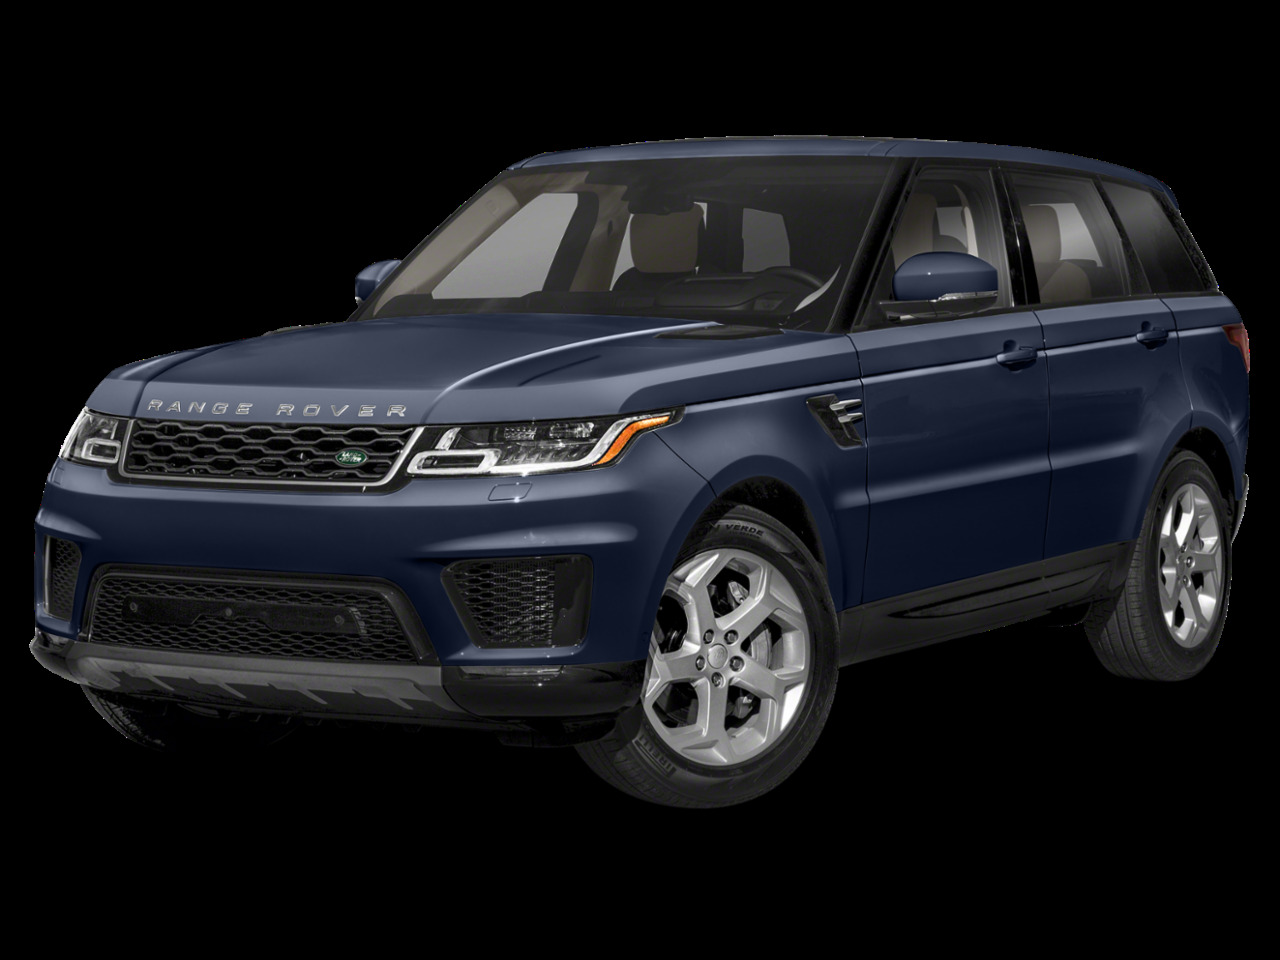 2020 Land Rover Range Rover Sport HSE DYNAMIC ** COMING SOON - CALL NOW TO RESERVE *